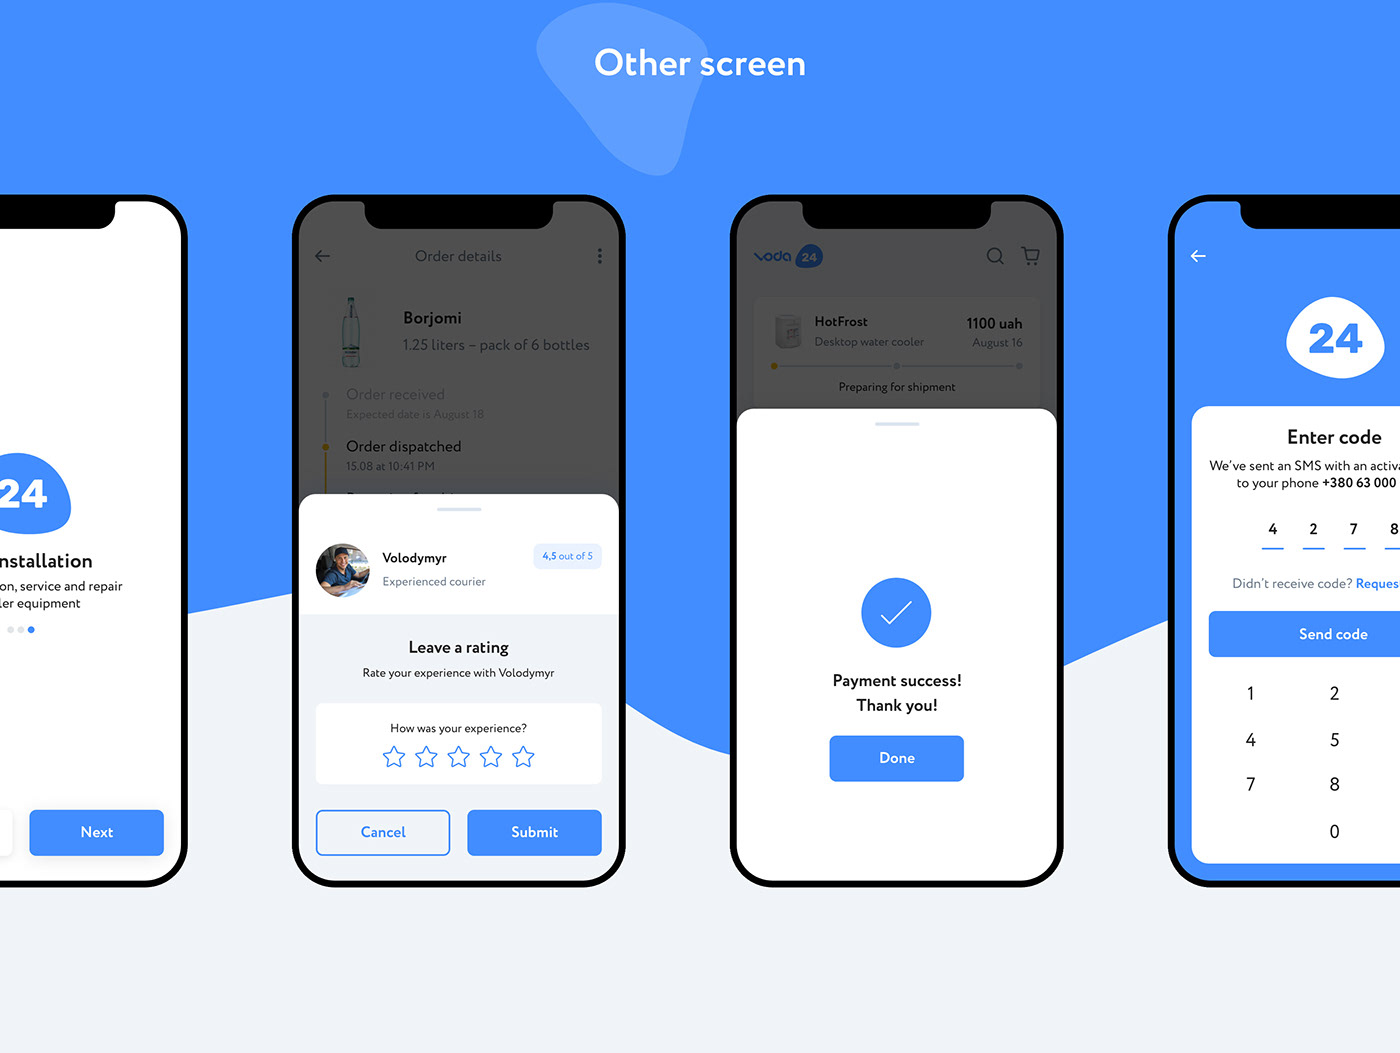 app water delivery ux UI delivery